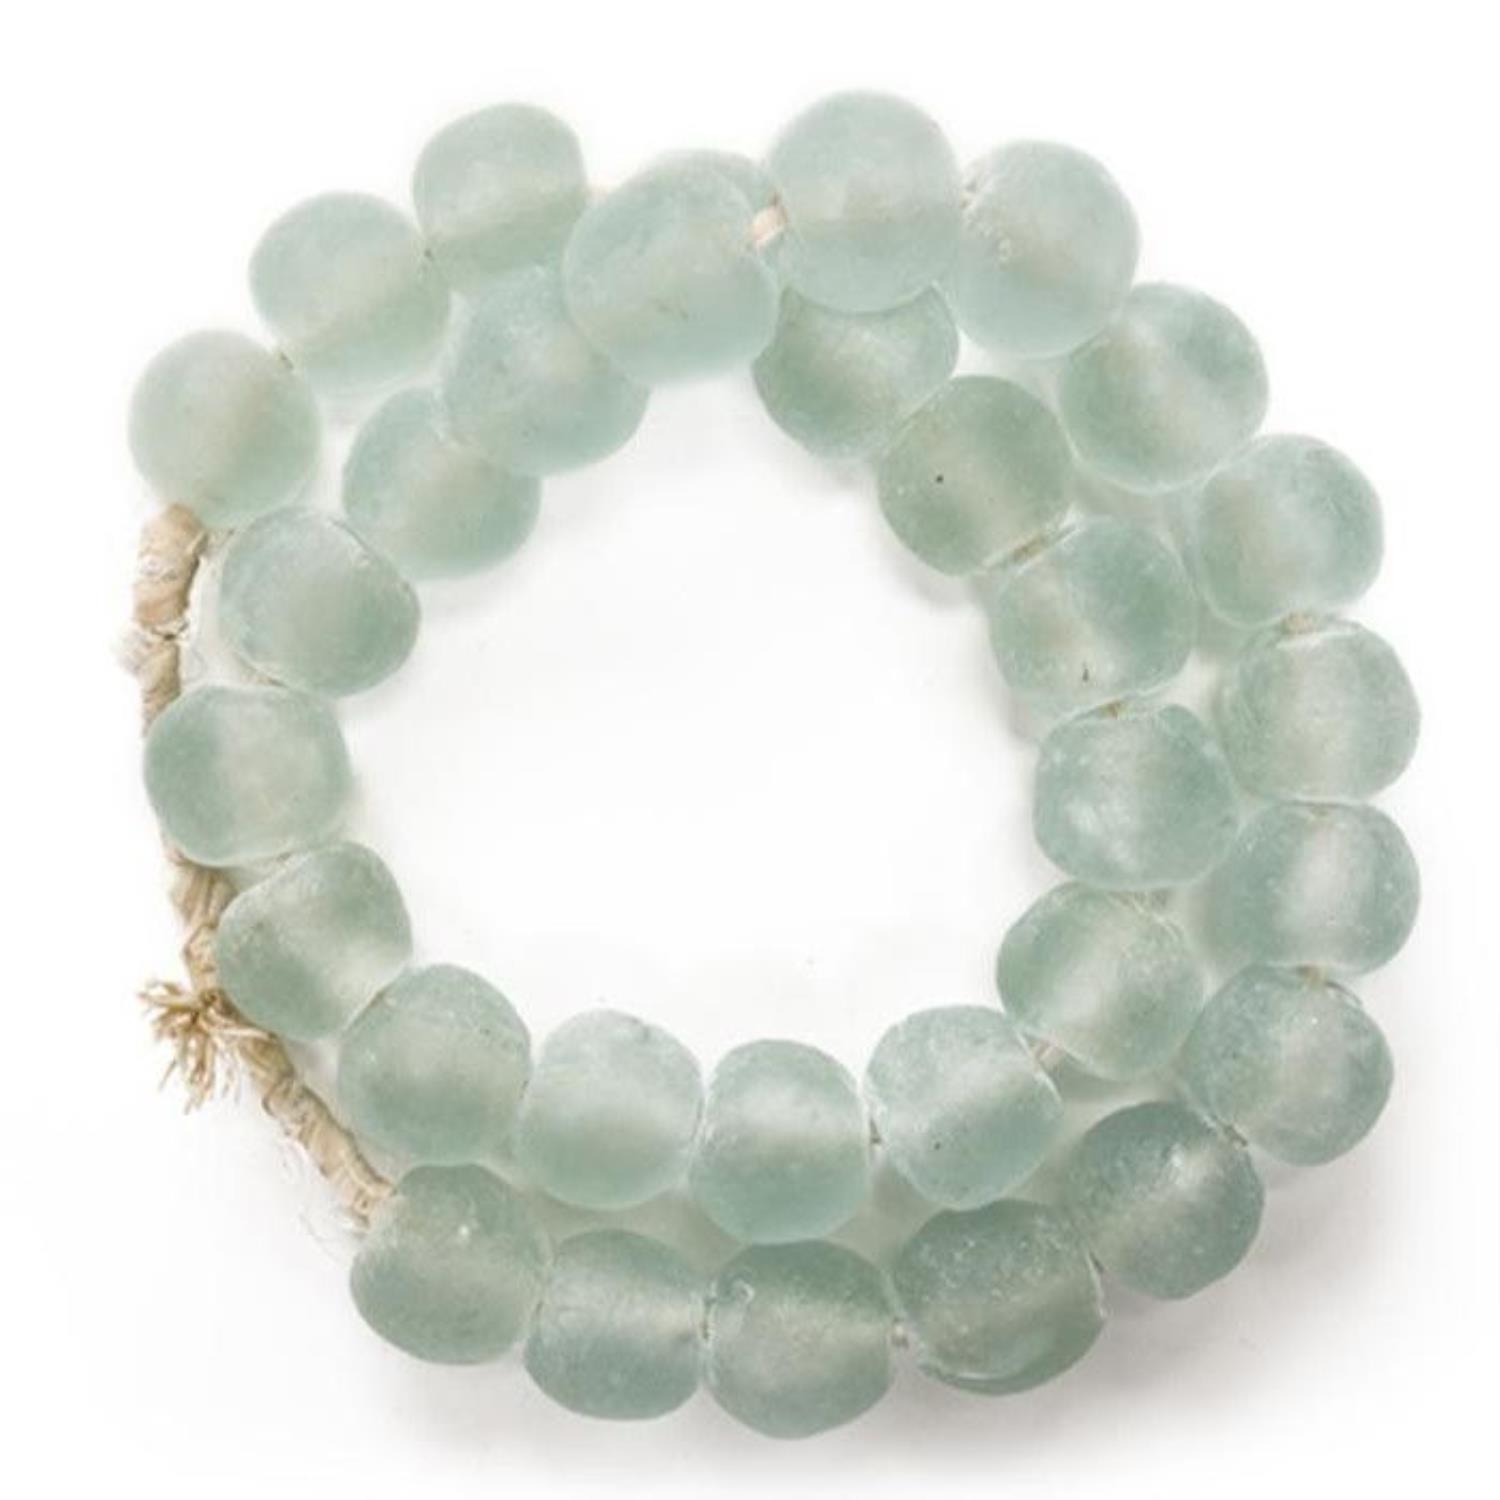 Legend of Asia Vintage Sea Glass Beads With Aqua White Finish 2506L-AW